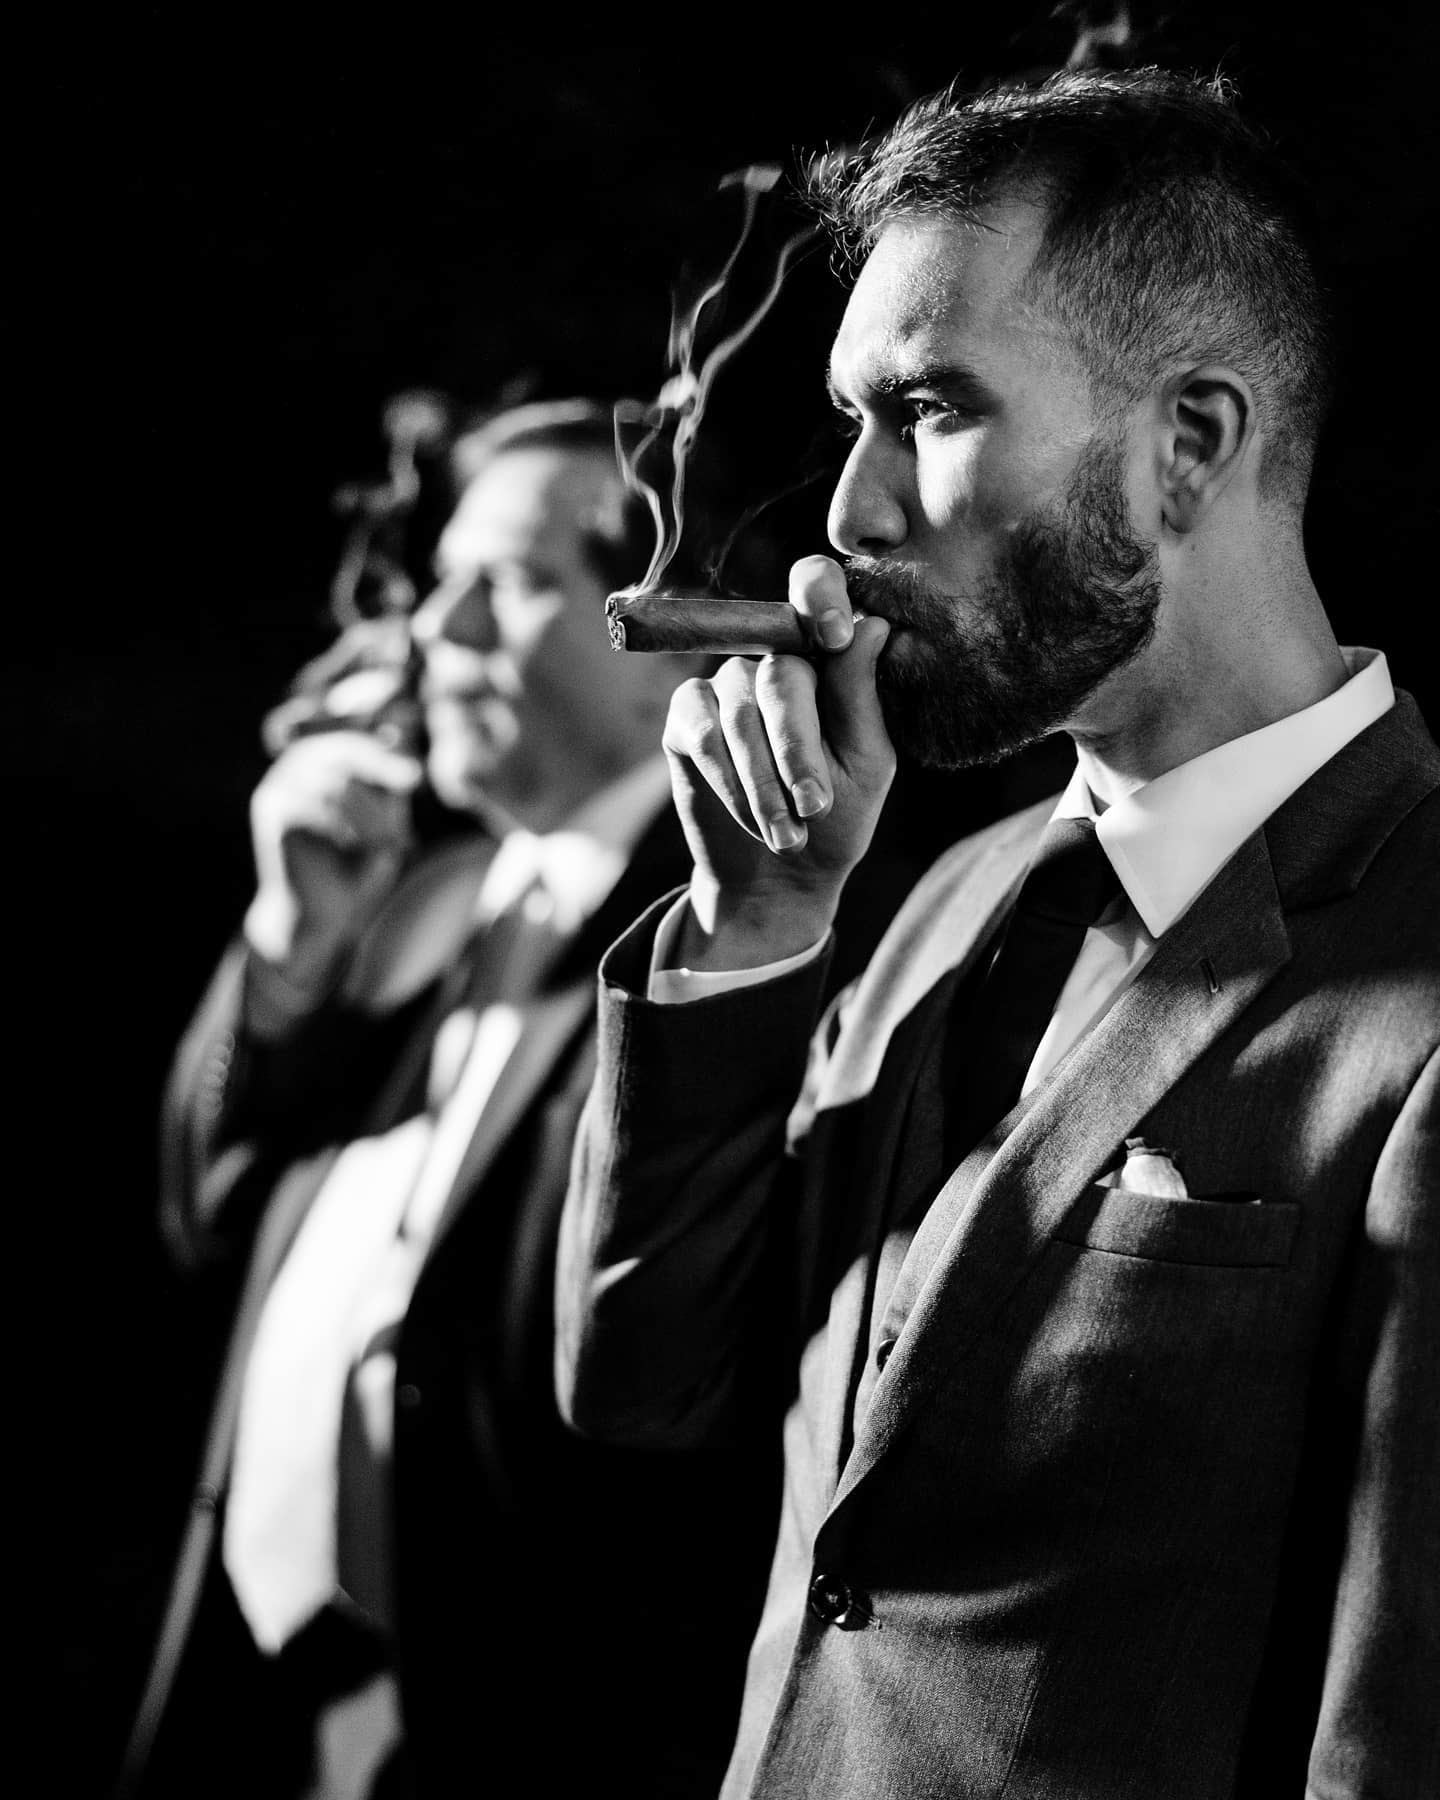 the groom and the groomsmen smoking a cigar in their wedding attire